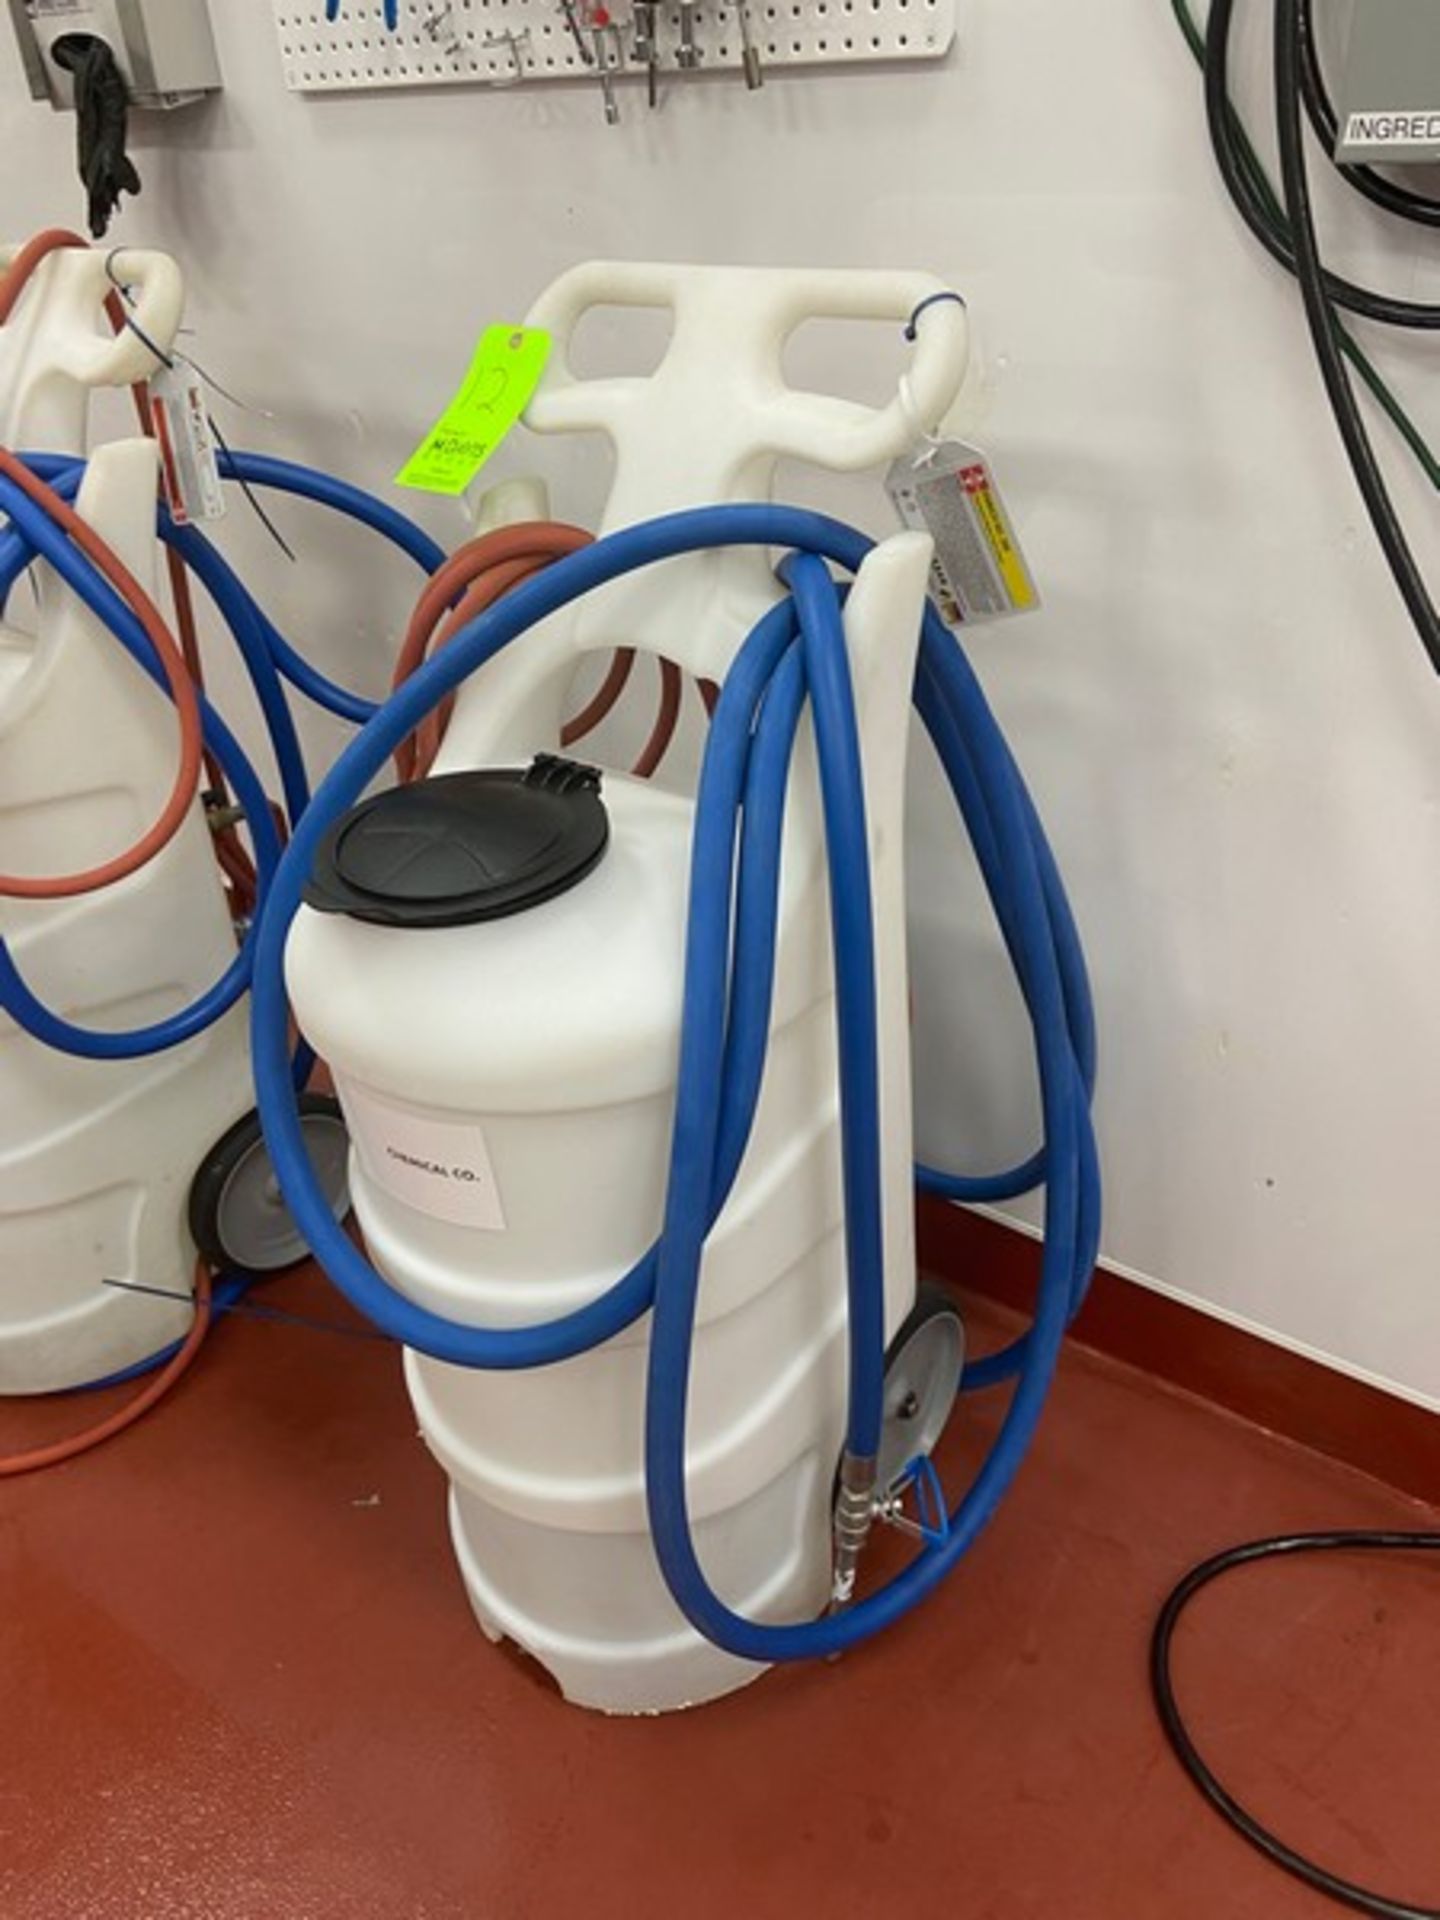 Hydrite Chemical Co. Portable Foamer, Plastic Design, Mounted on Casters, with Associated Hoses & - Image 2 of 3